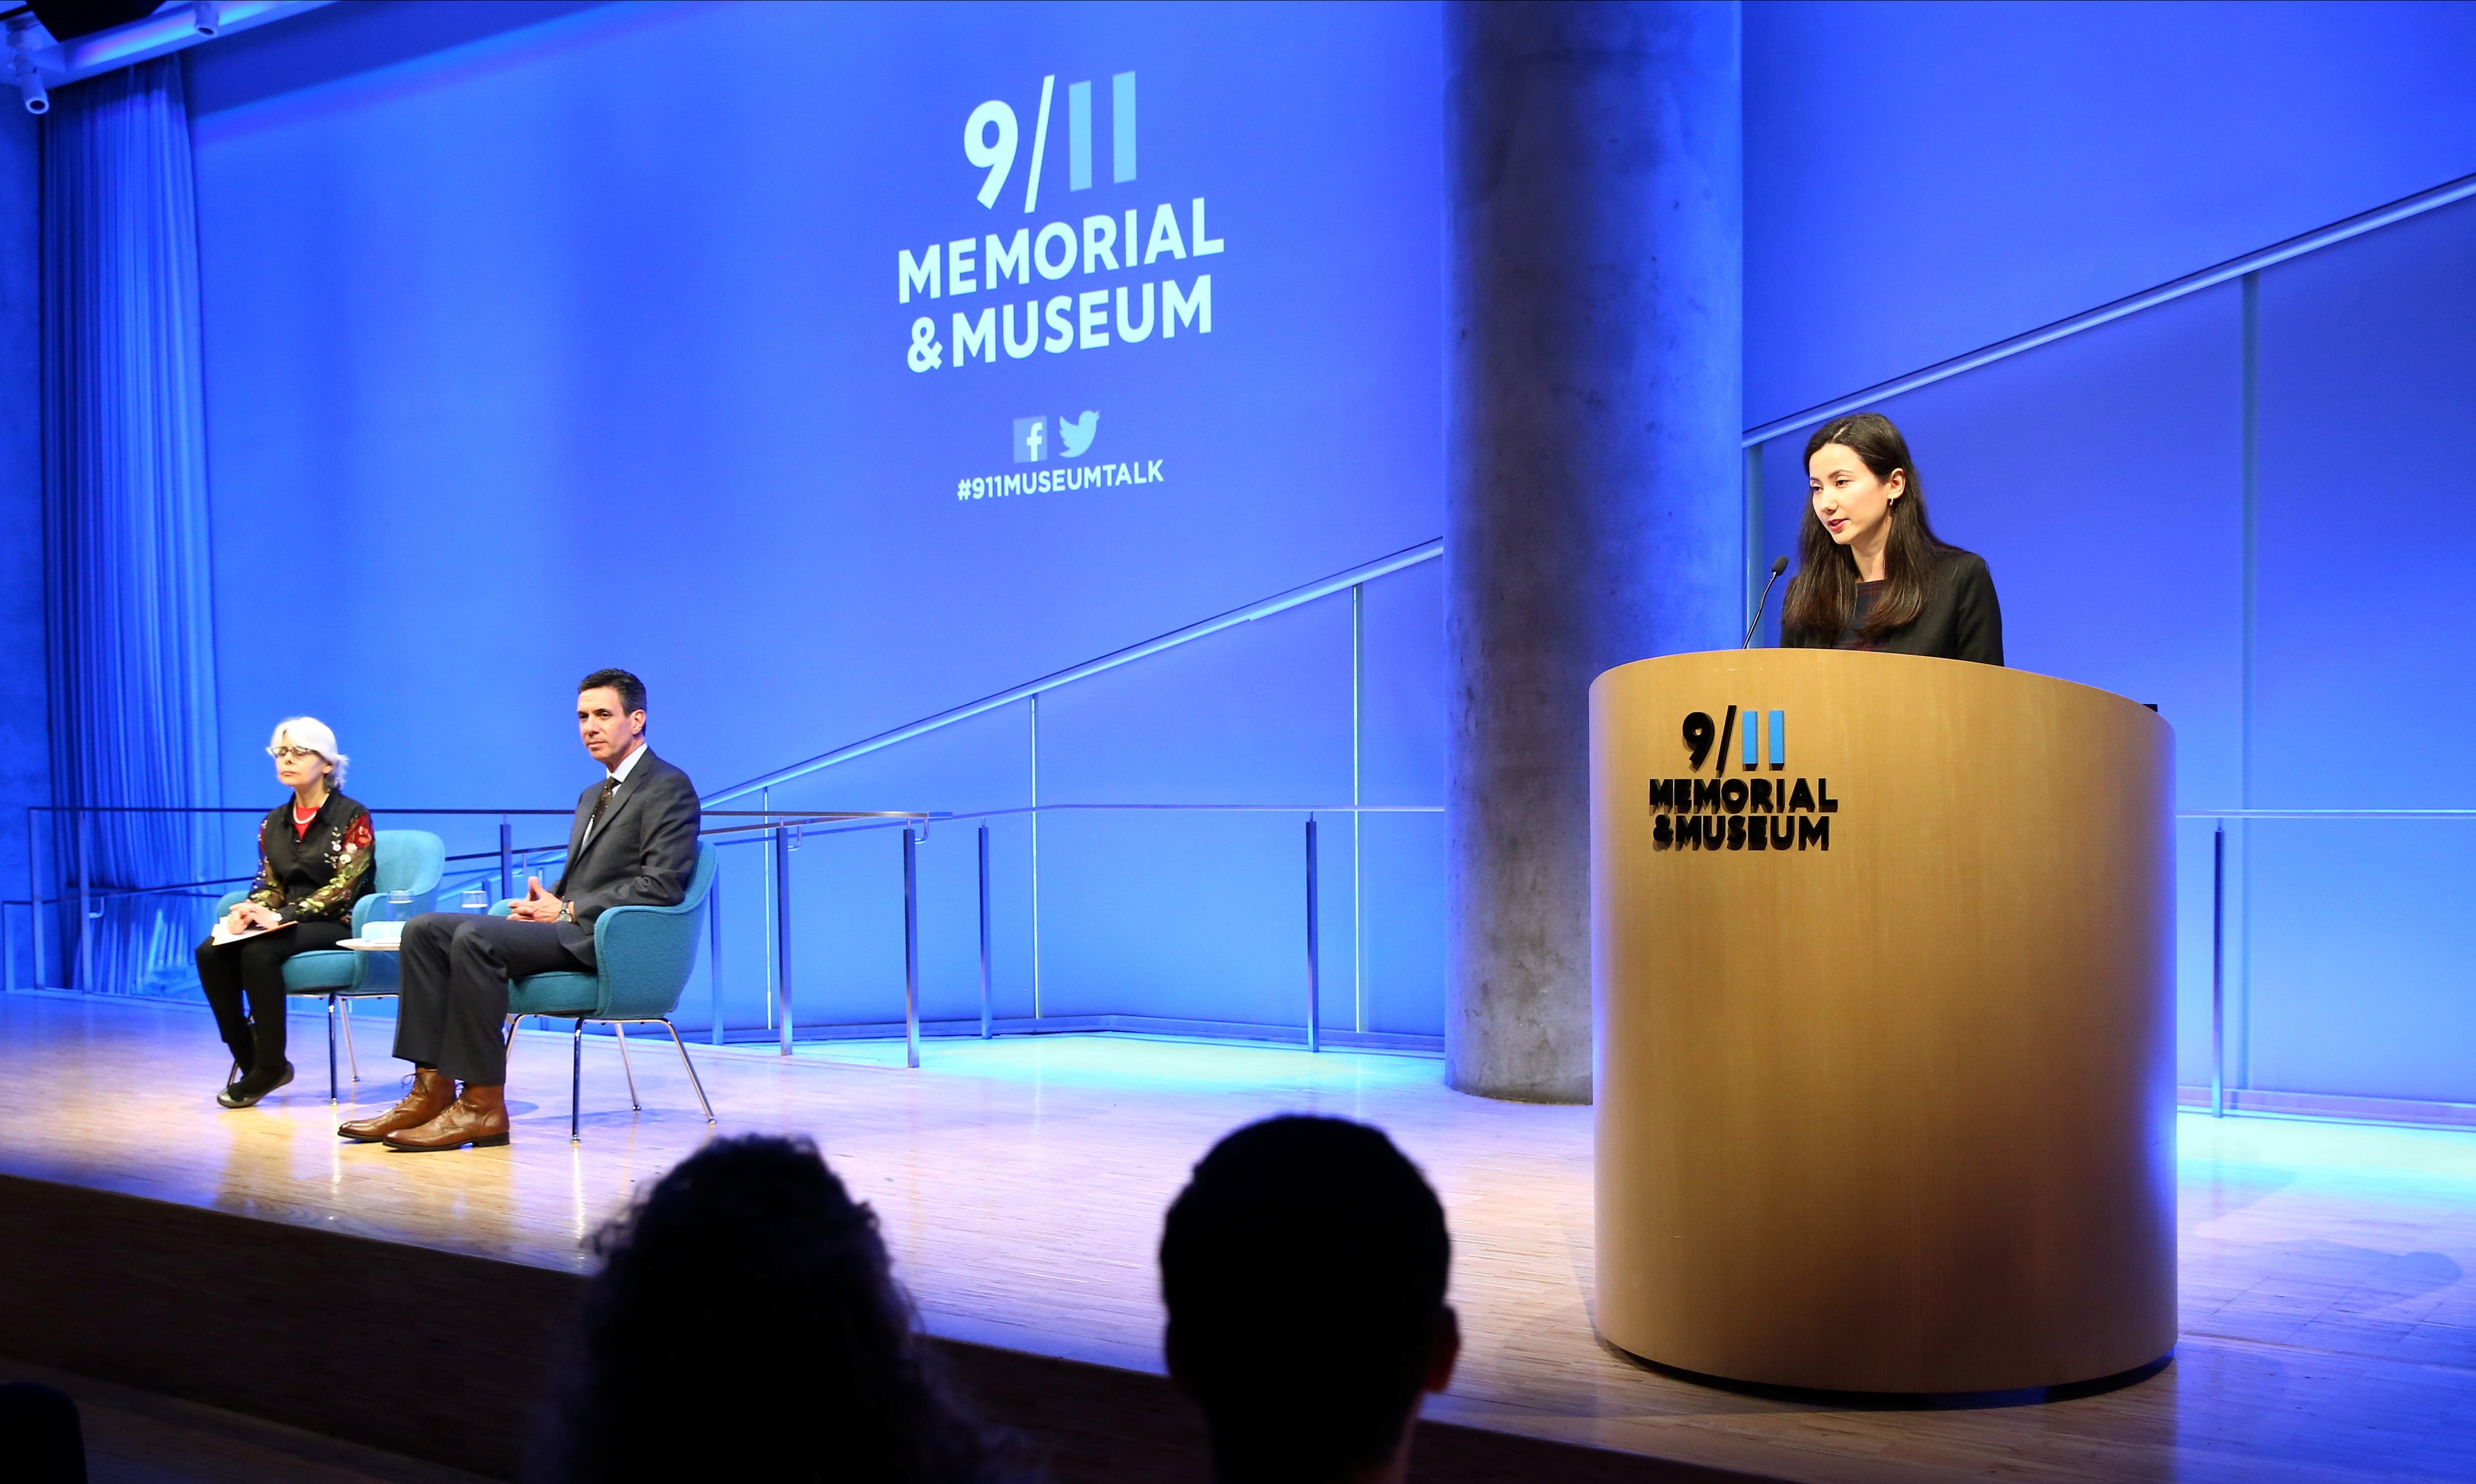 A man and a woman sit on stage during a public program in the Museum auditorium. A second woman stands at a wooden podium, speaking to the audience. Blue light fills the wall behind the stage and a projection on the wall reads “9/11 Memorial & Museum.”